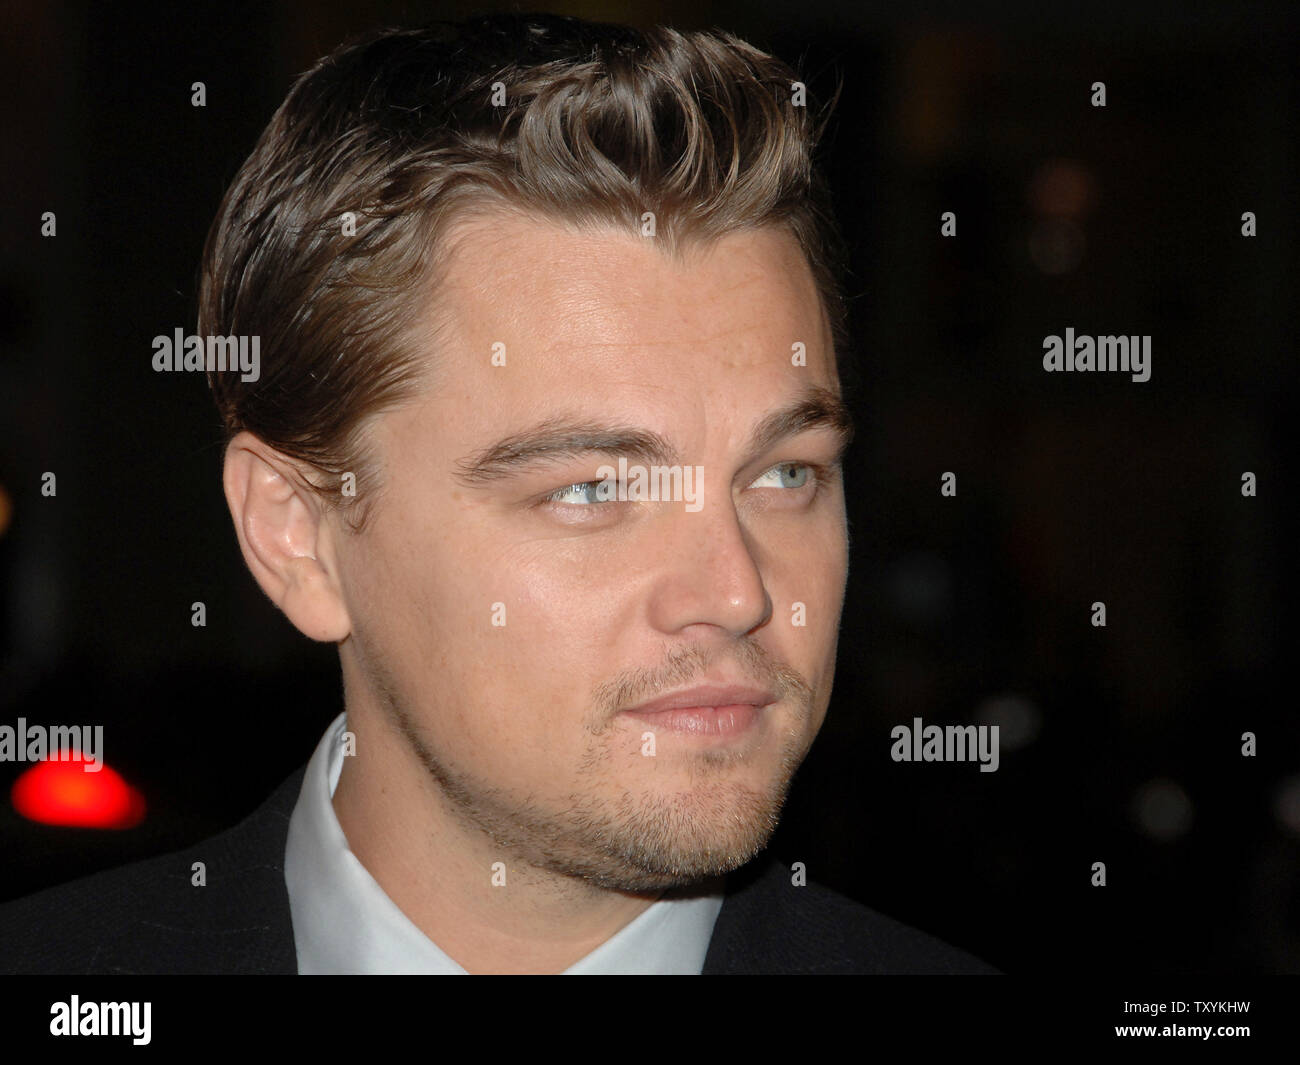 Actor Leonardo DiCaprio, star of the new motion picture drama 'Blood Diamond', arrives for the premiere of the film at Grauman's Chinese Theatre in the Hollywood section of Los Angeles on December 6, 2006. The film, set in Sierra Leone is about a quest to recover a rare diamond. (UPI Photo/Jim Ruymen) Stock Photo